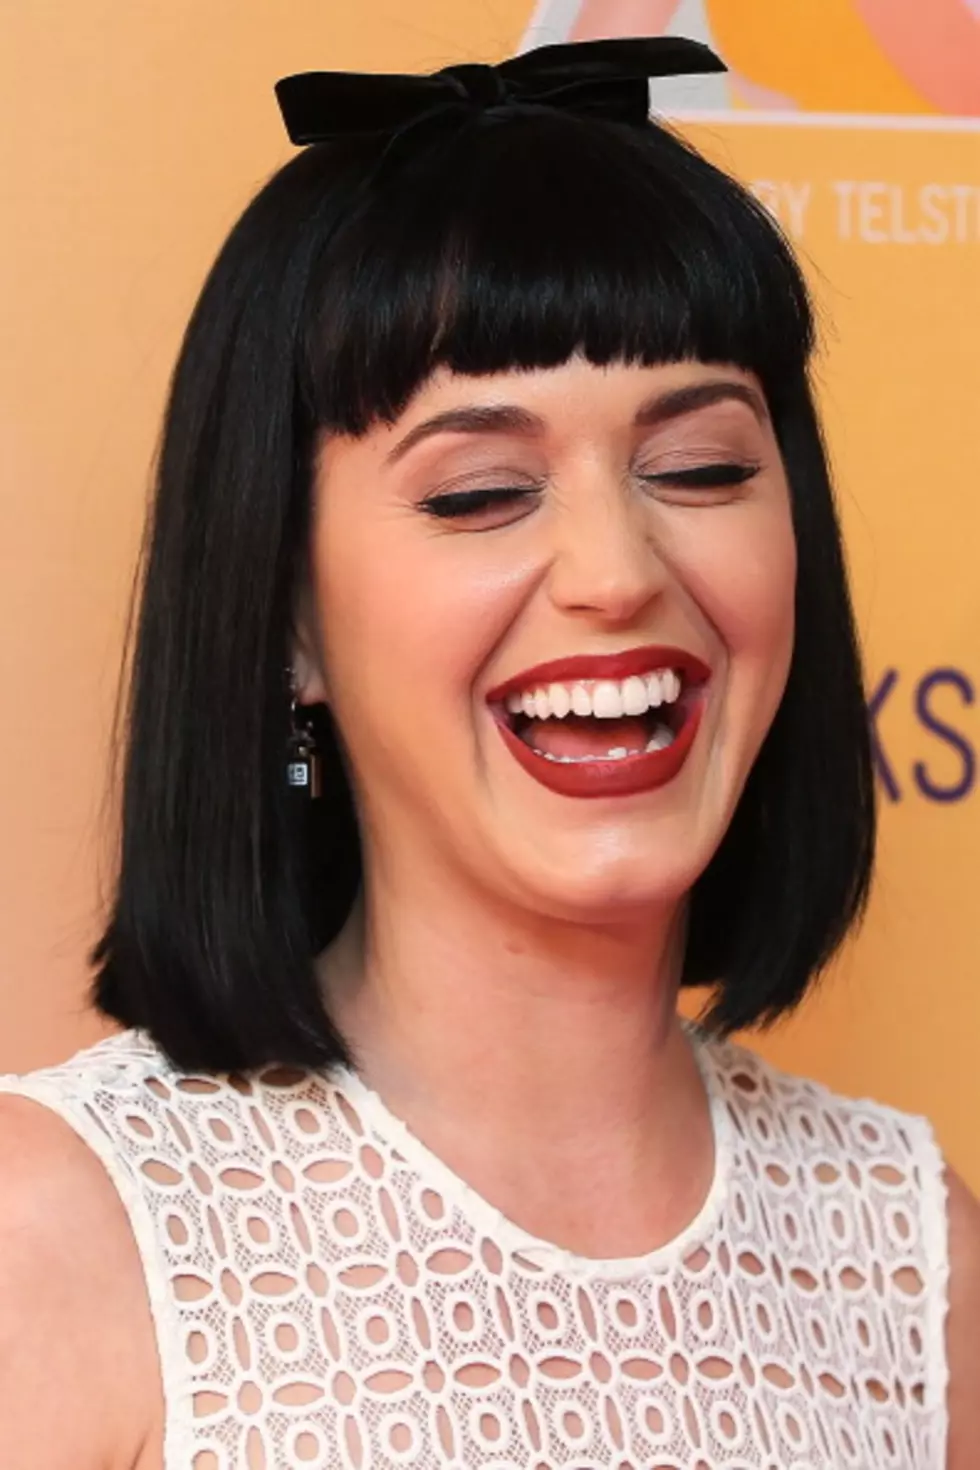 Win a Trip to See Katy Perry in New Orleans!